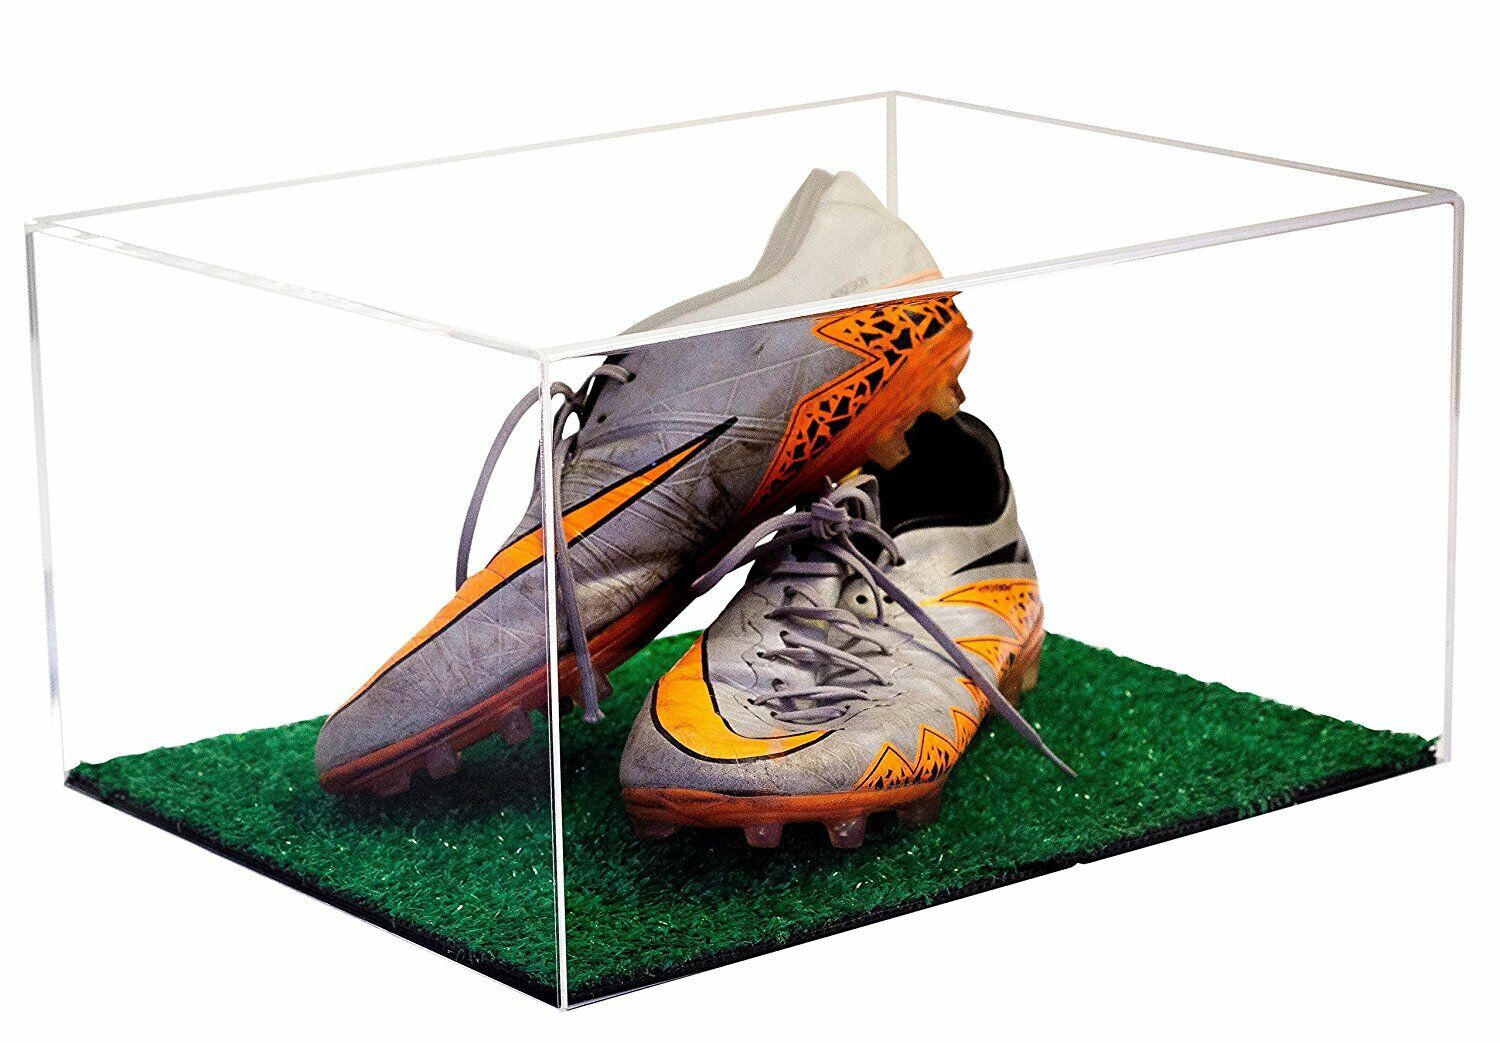 Soccer, Baseball or Football Cleats Clear Display Case with Turf Floor(A026-CTB)